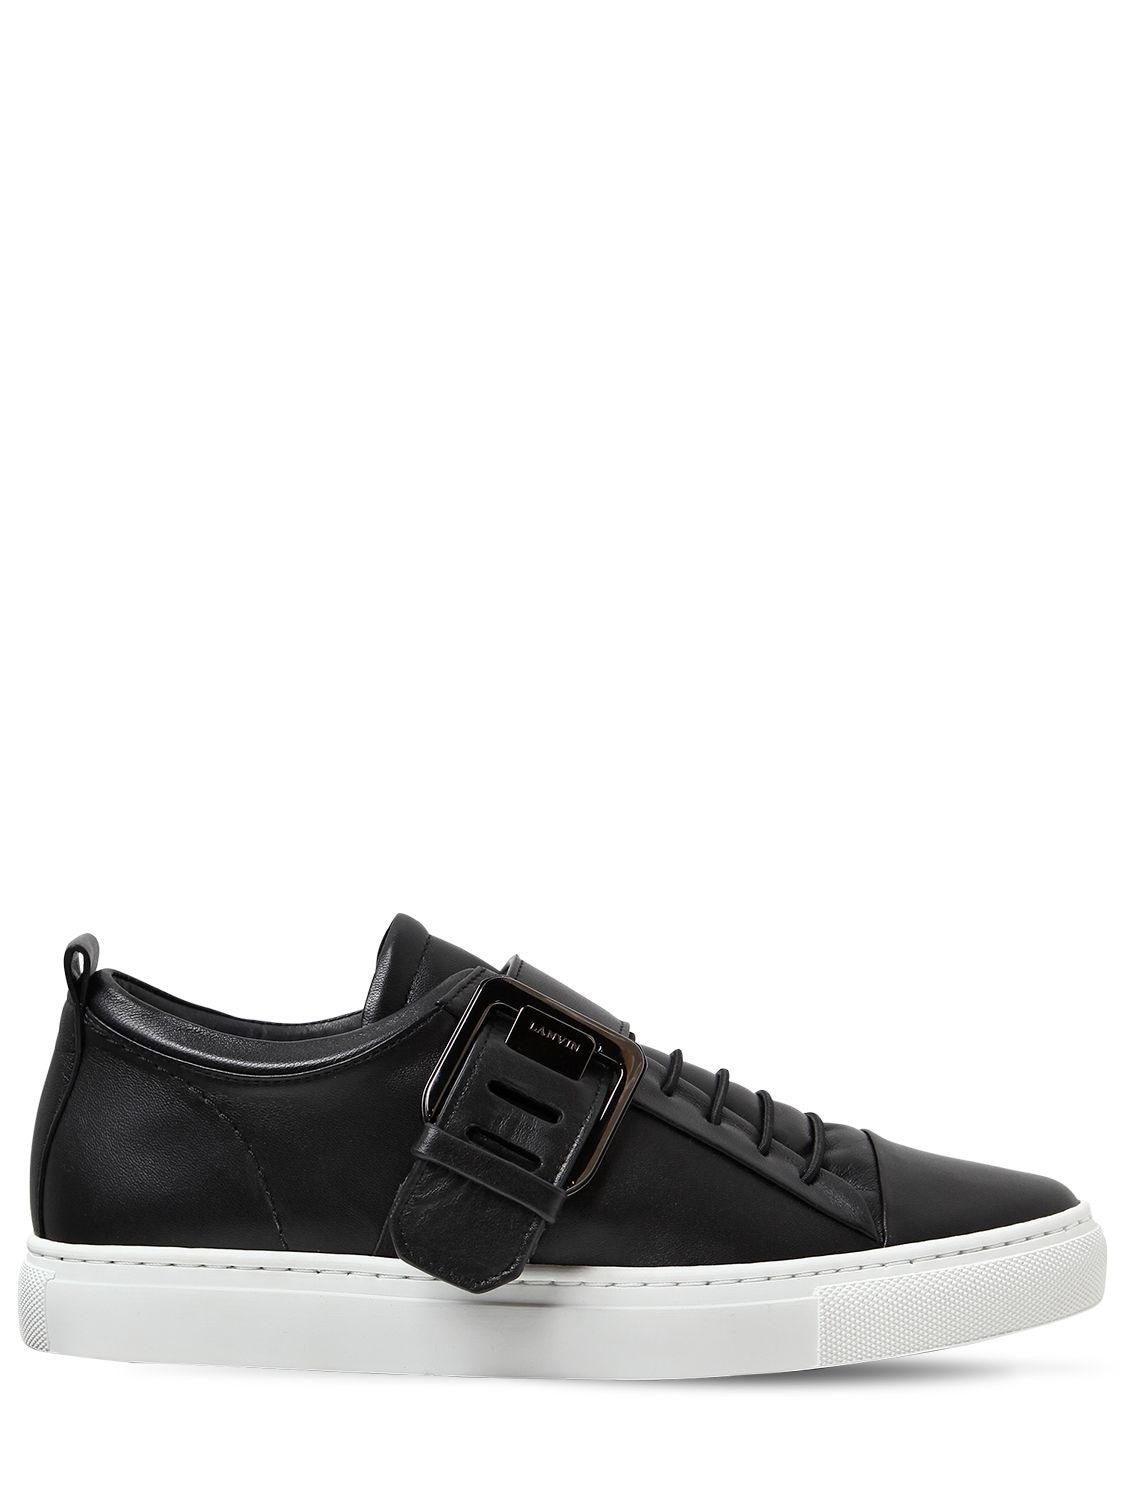 LANVIN 20MM SQUARE BUCKLE LEATHER trainers,68IA30002-MTA1